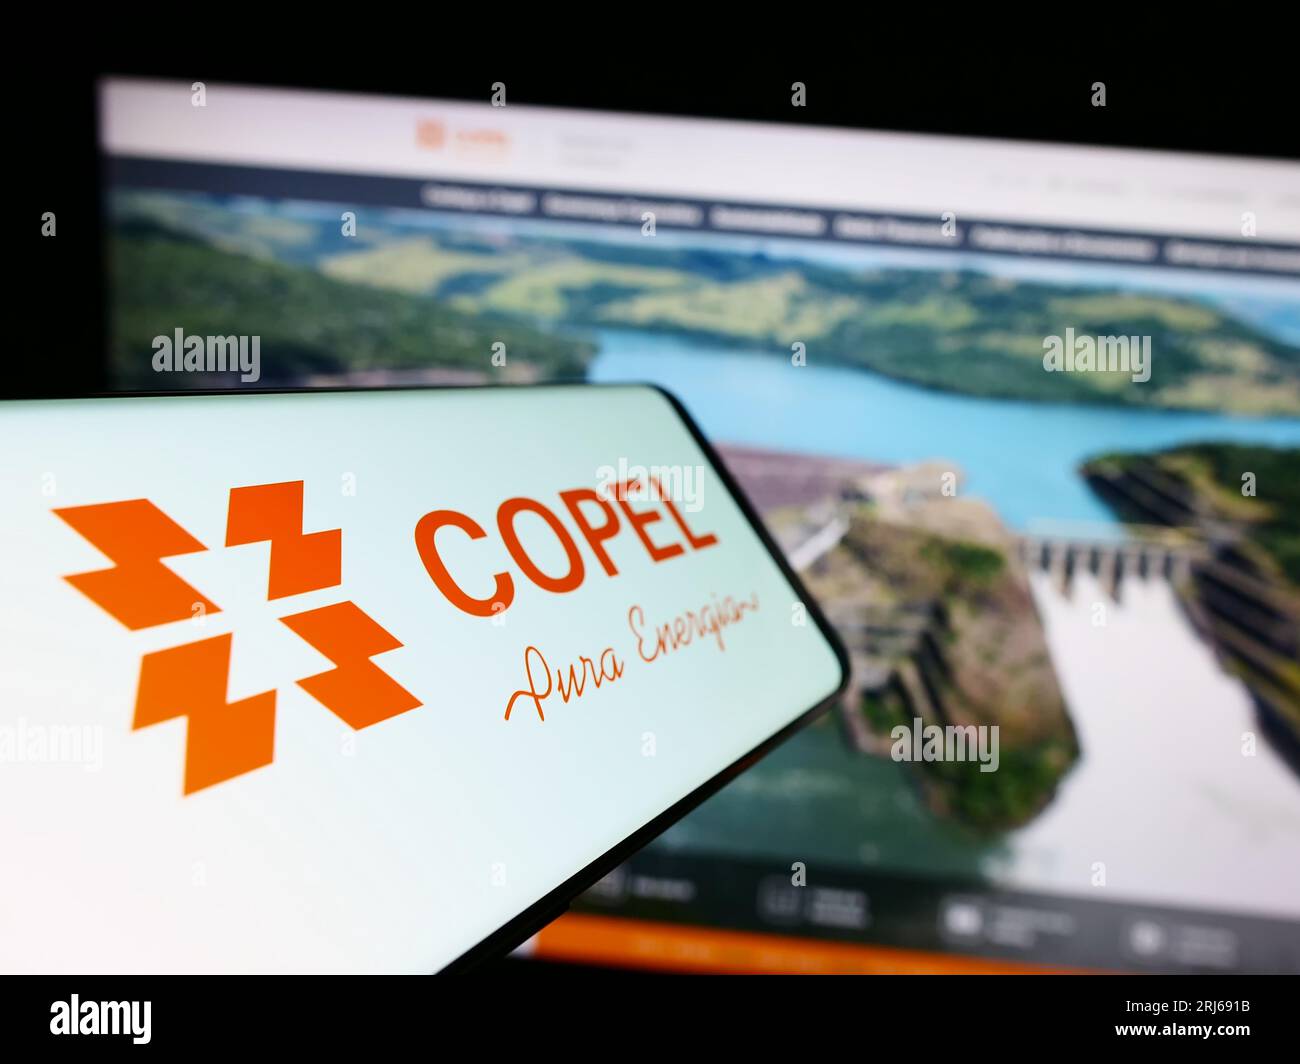 Smartphone with logo of company Companhia Paranaense de Energia (Copel) on screen in front of website. Focus on center-left of phone display. Stock Photo